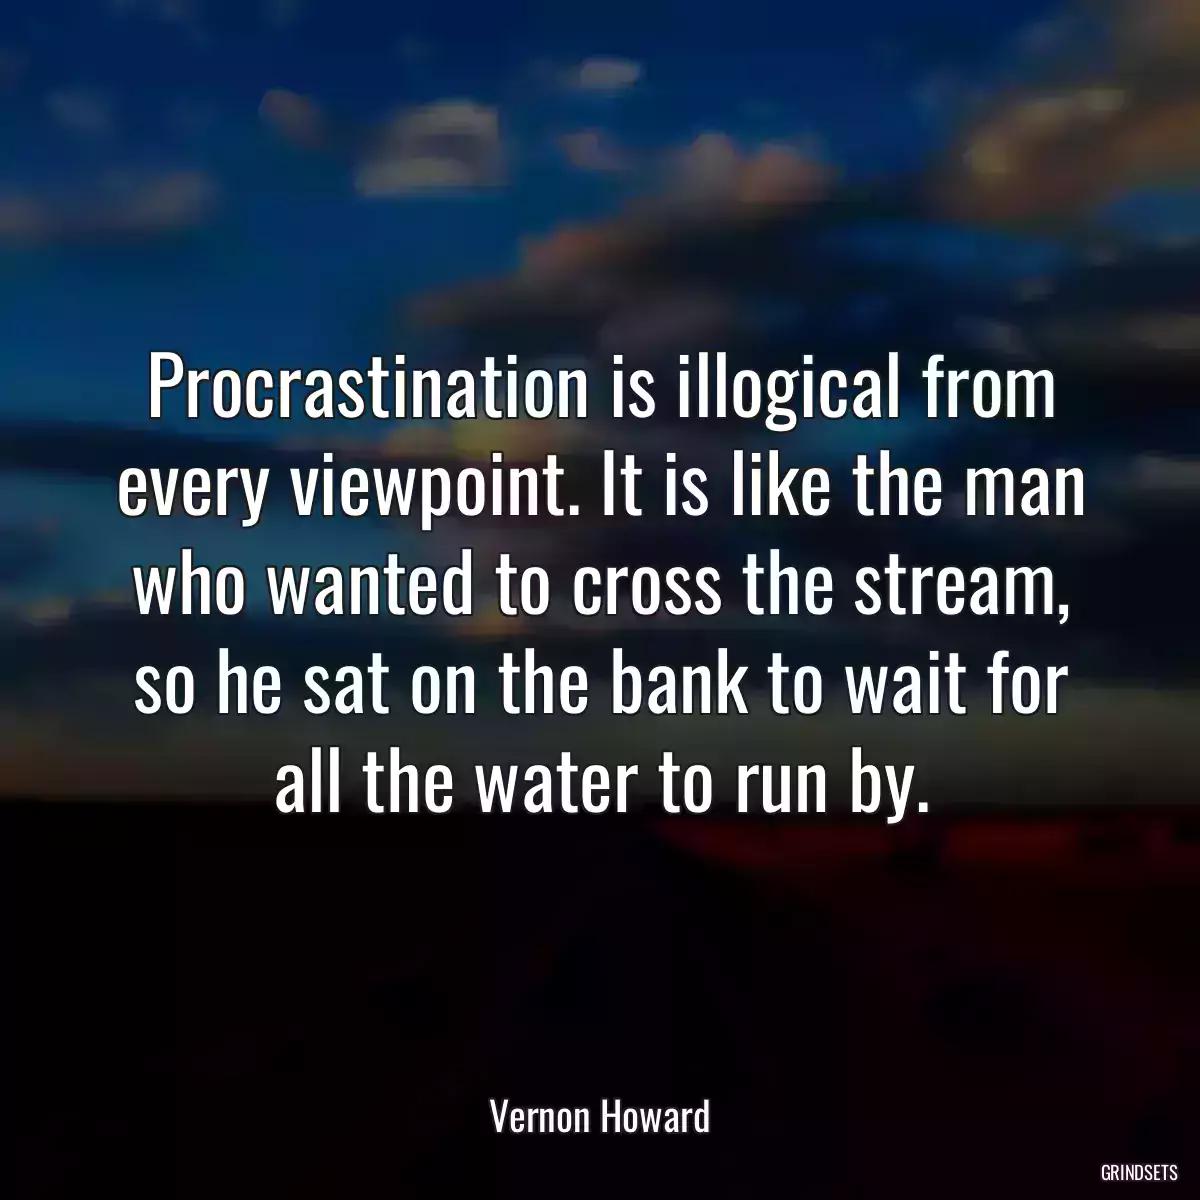 Procrastination is illogical from every viewpoint. It is like the man who wanted to cross the stream, so he sat on the bank to wait for all the water to run by.